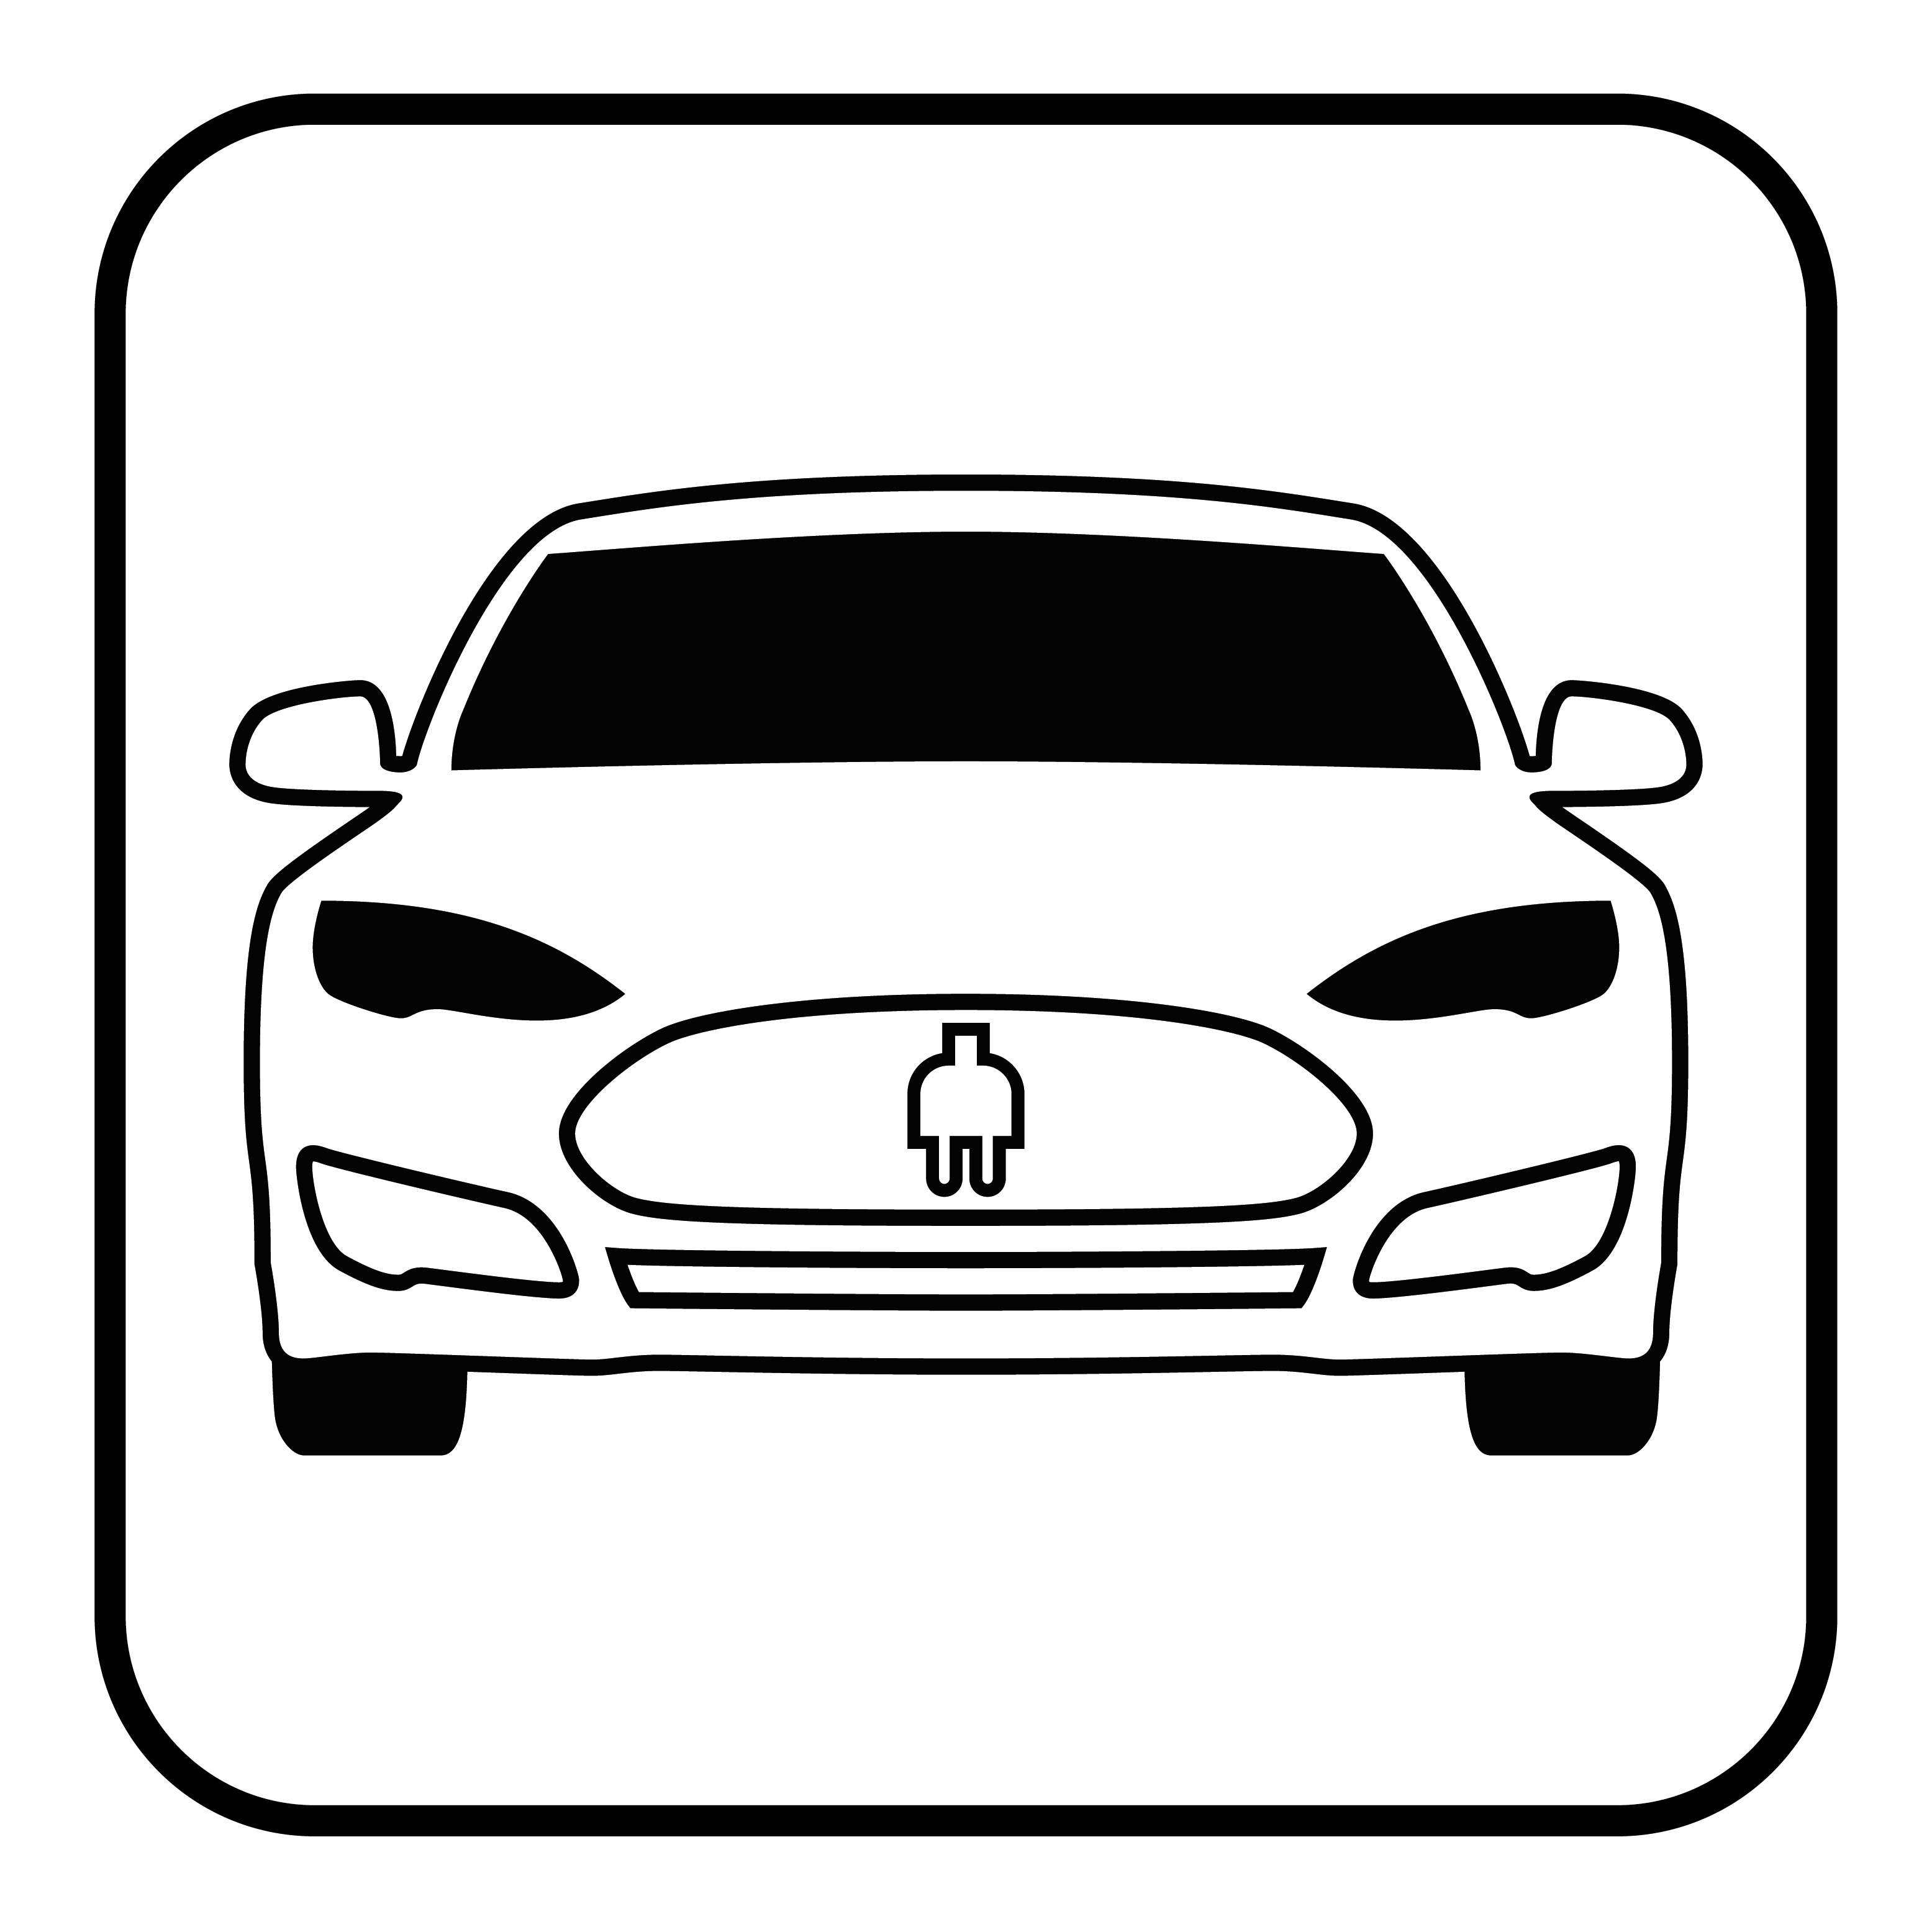 Electrical cars icon